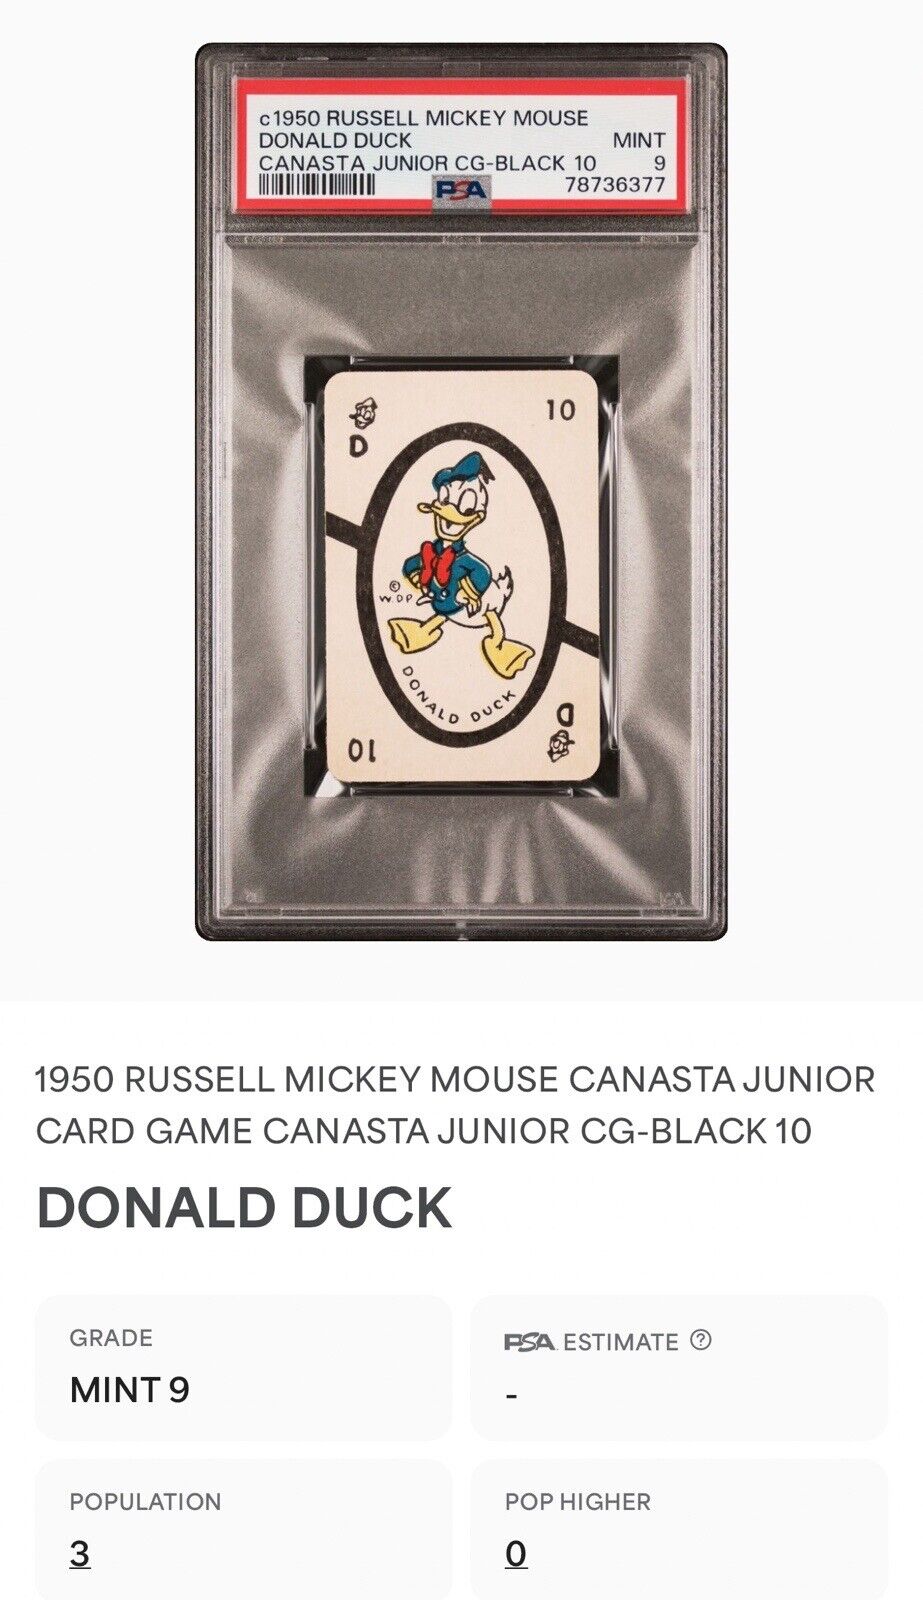 RARE VINTAGE 1950s RUSSELL MICKEY MOUSE DONALD DUCK CANASTA CARD PSA 9 MINT